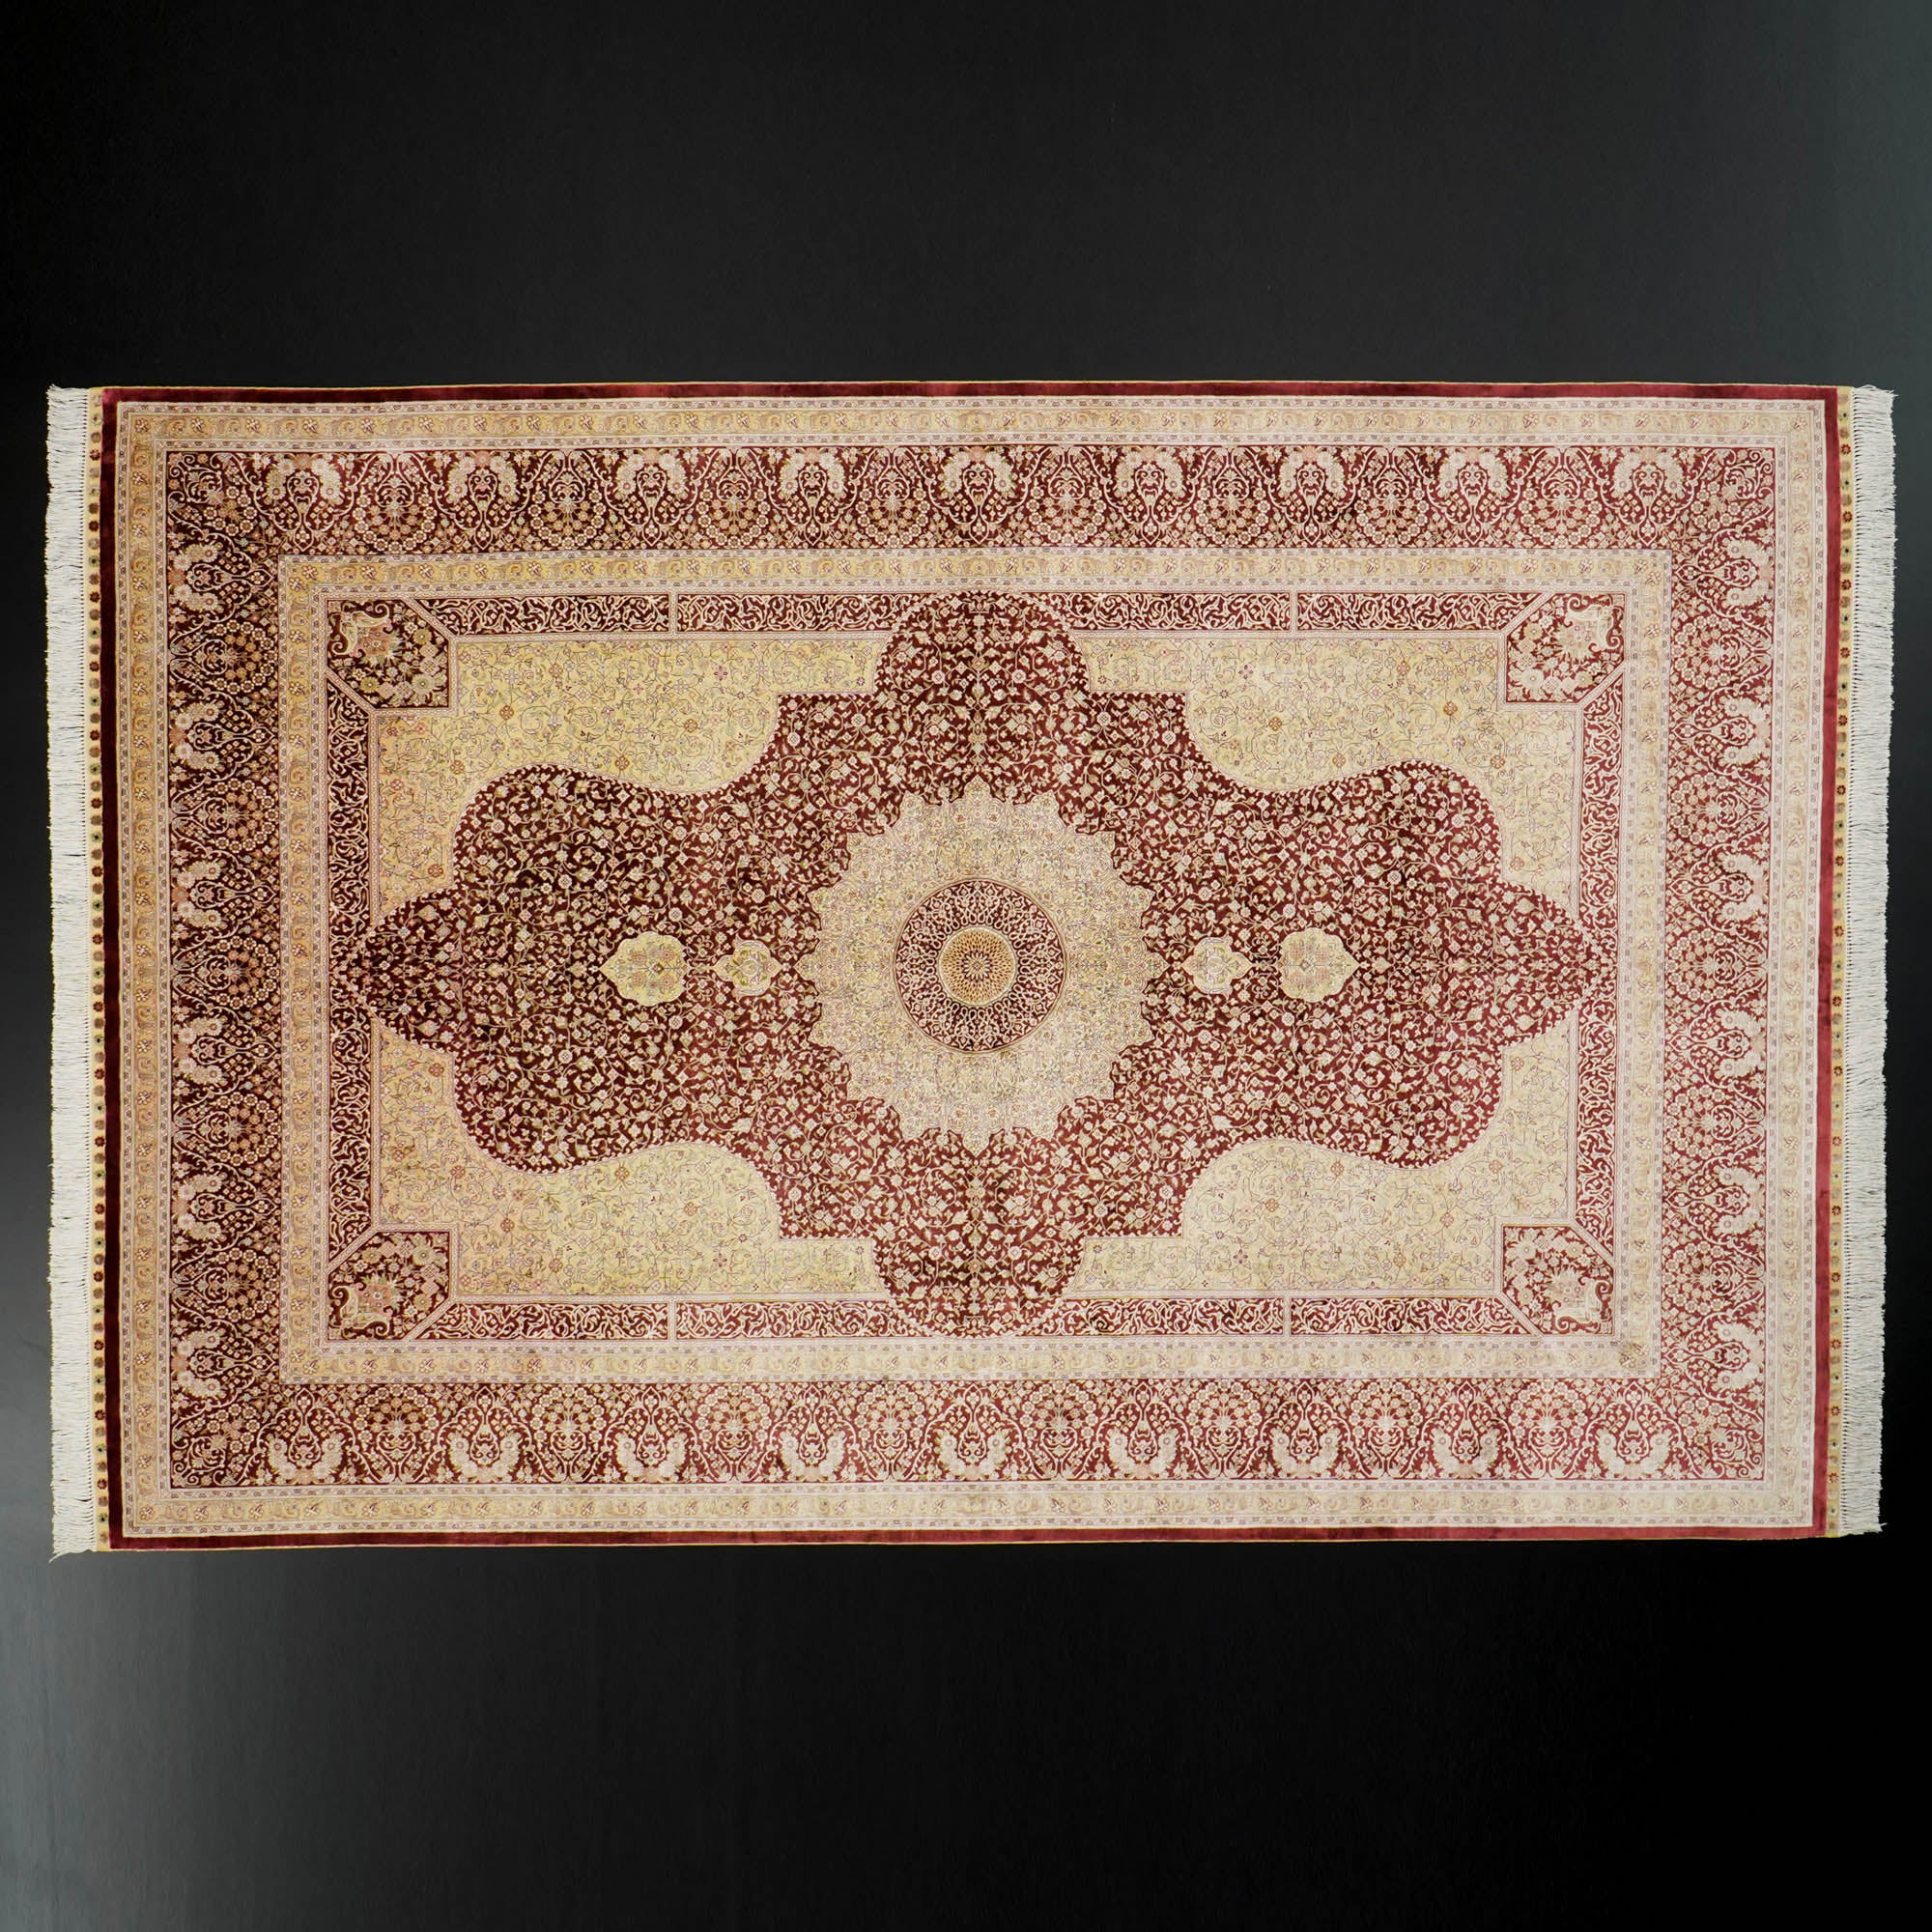 Frame Patterned Hand Woven Silk Persian Rug